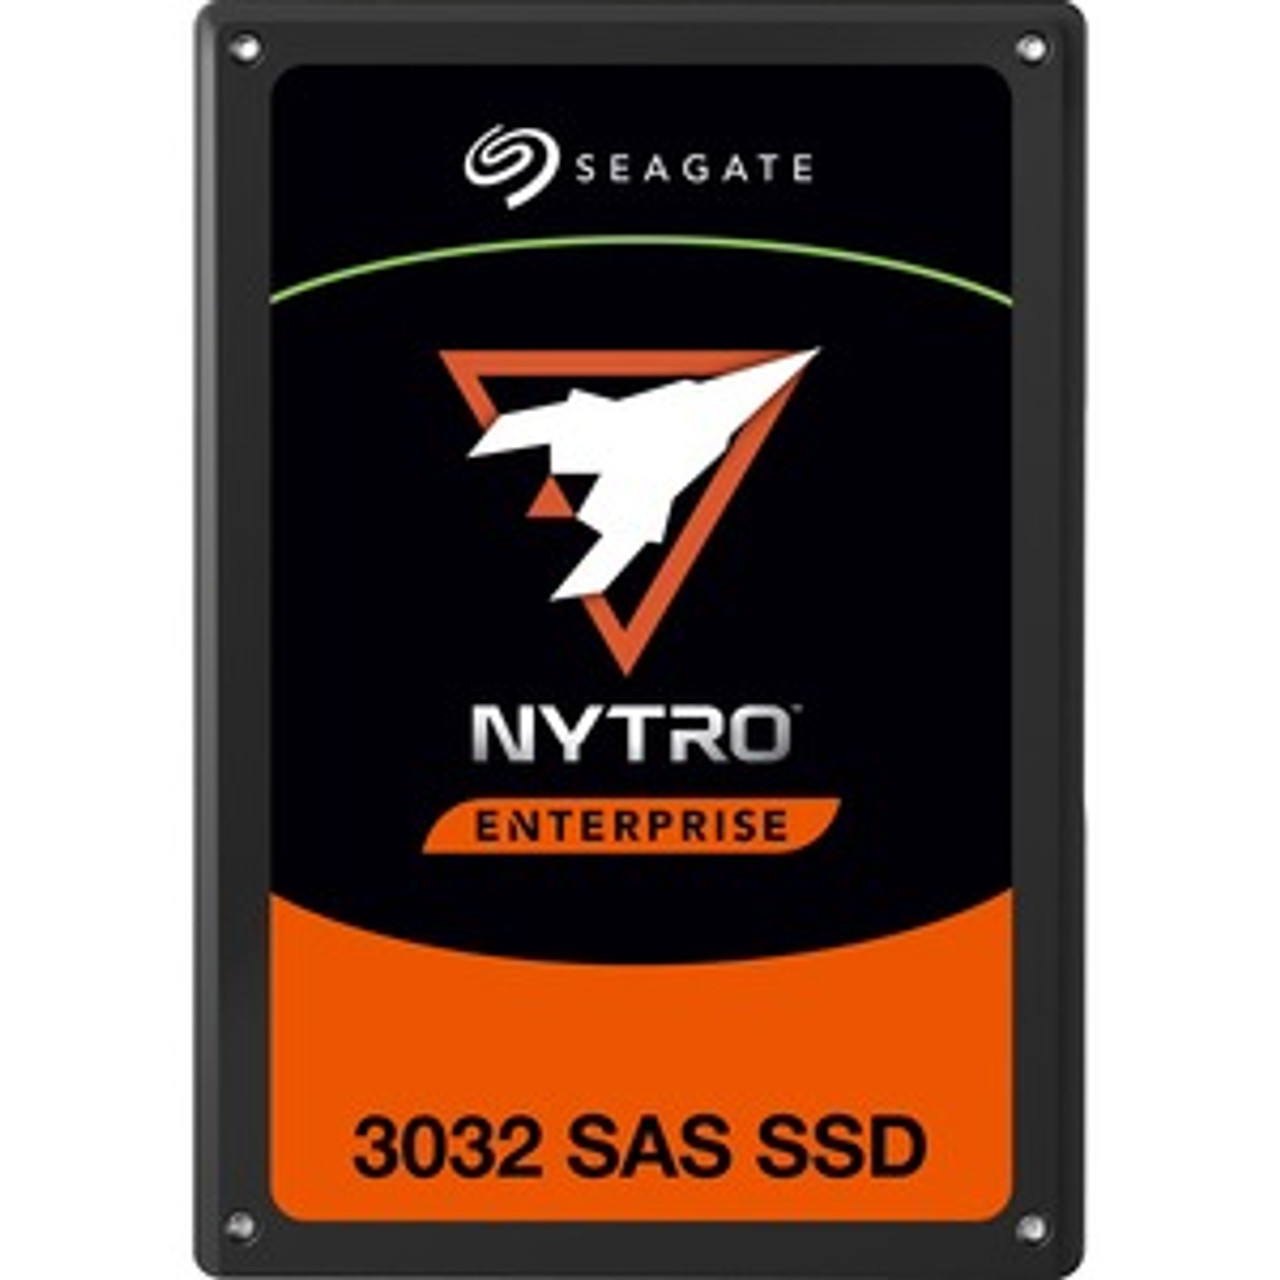 XS7680SE70104-10PK Seagate Nytro 3032 Series 7.68TB eTLC SAS 12Gbps Scaled Endurance 2.5-inch Internal Solid State Drive (SSD) (10-Pack)